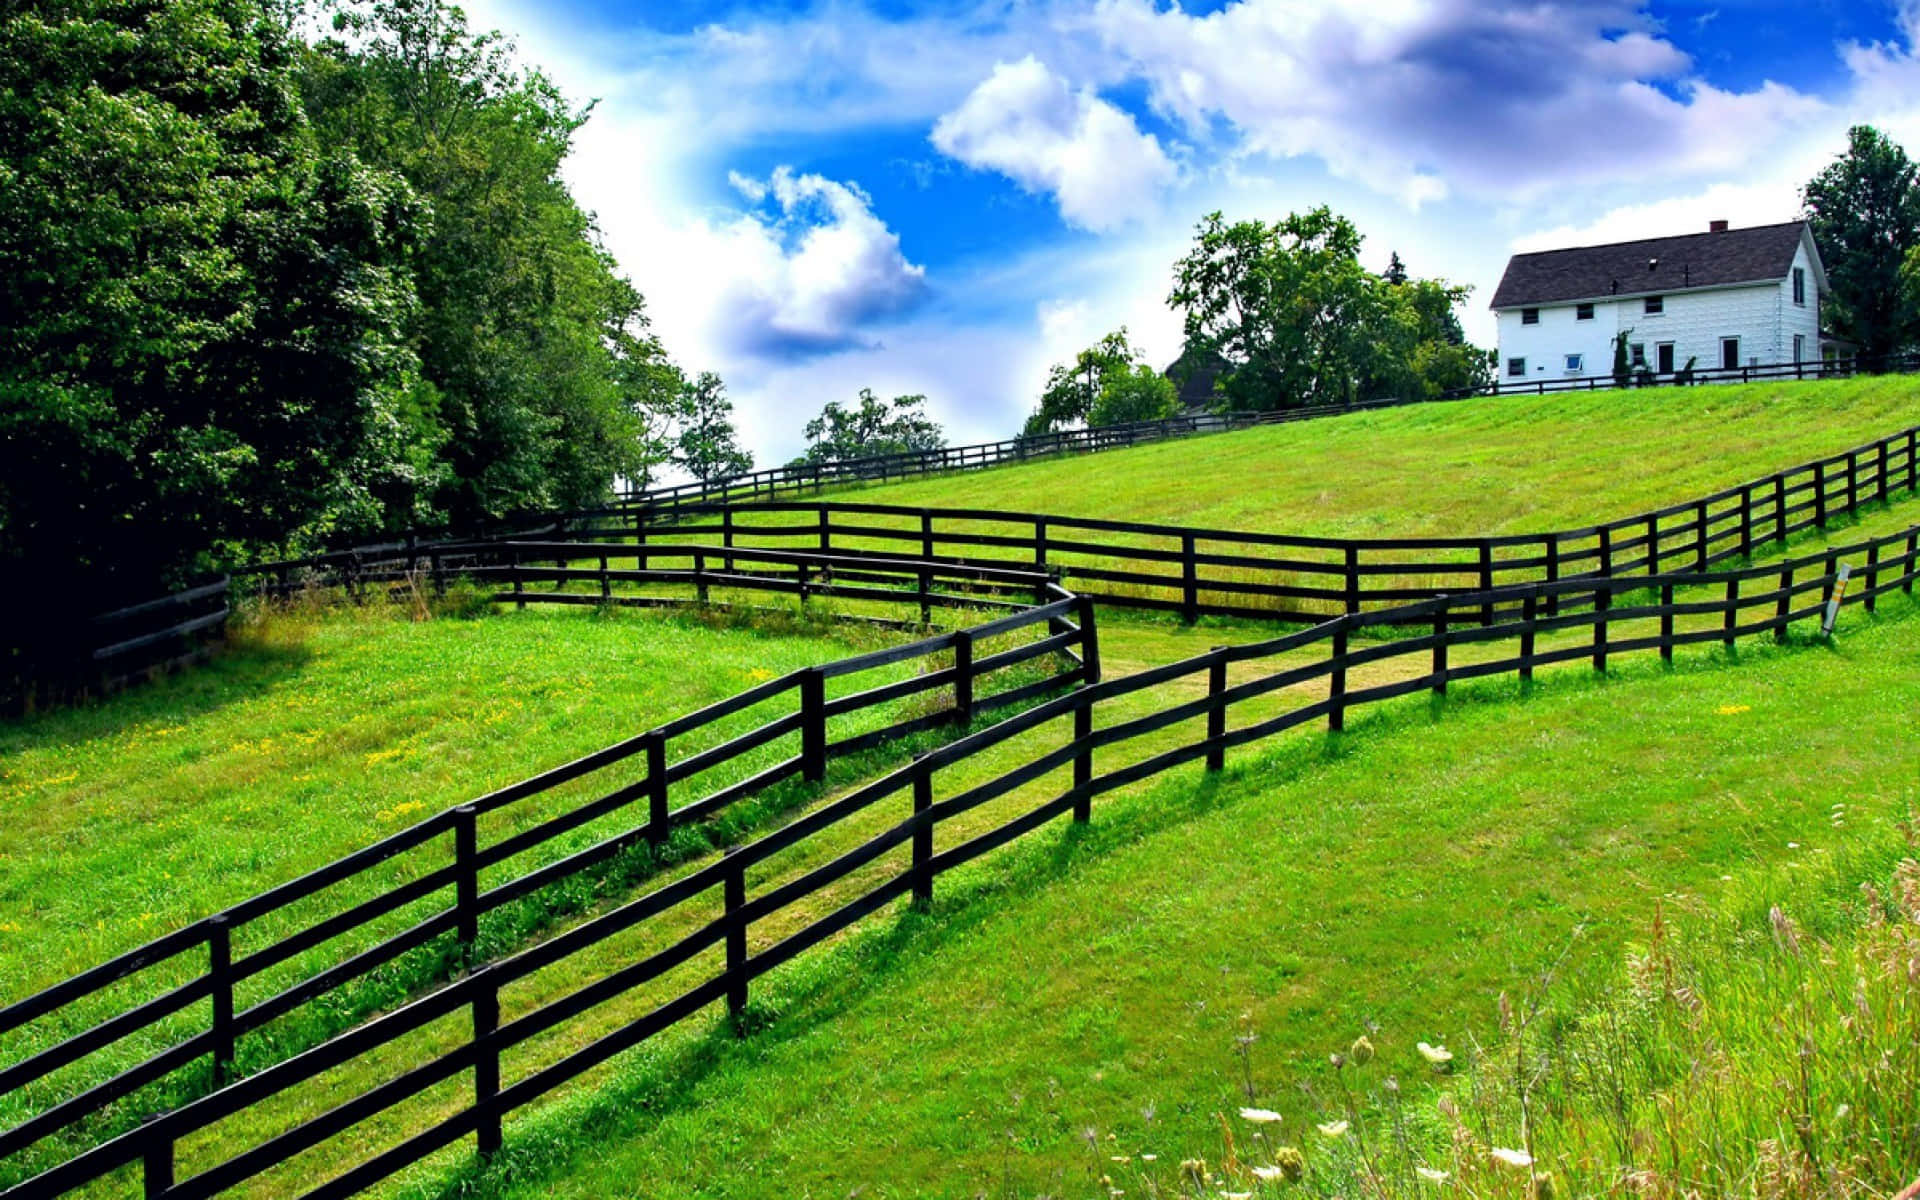 A picturesque view of a ranch located in the countryside. Wallpaper